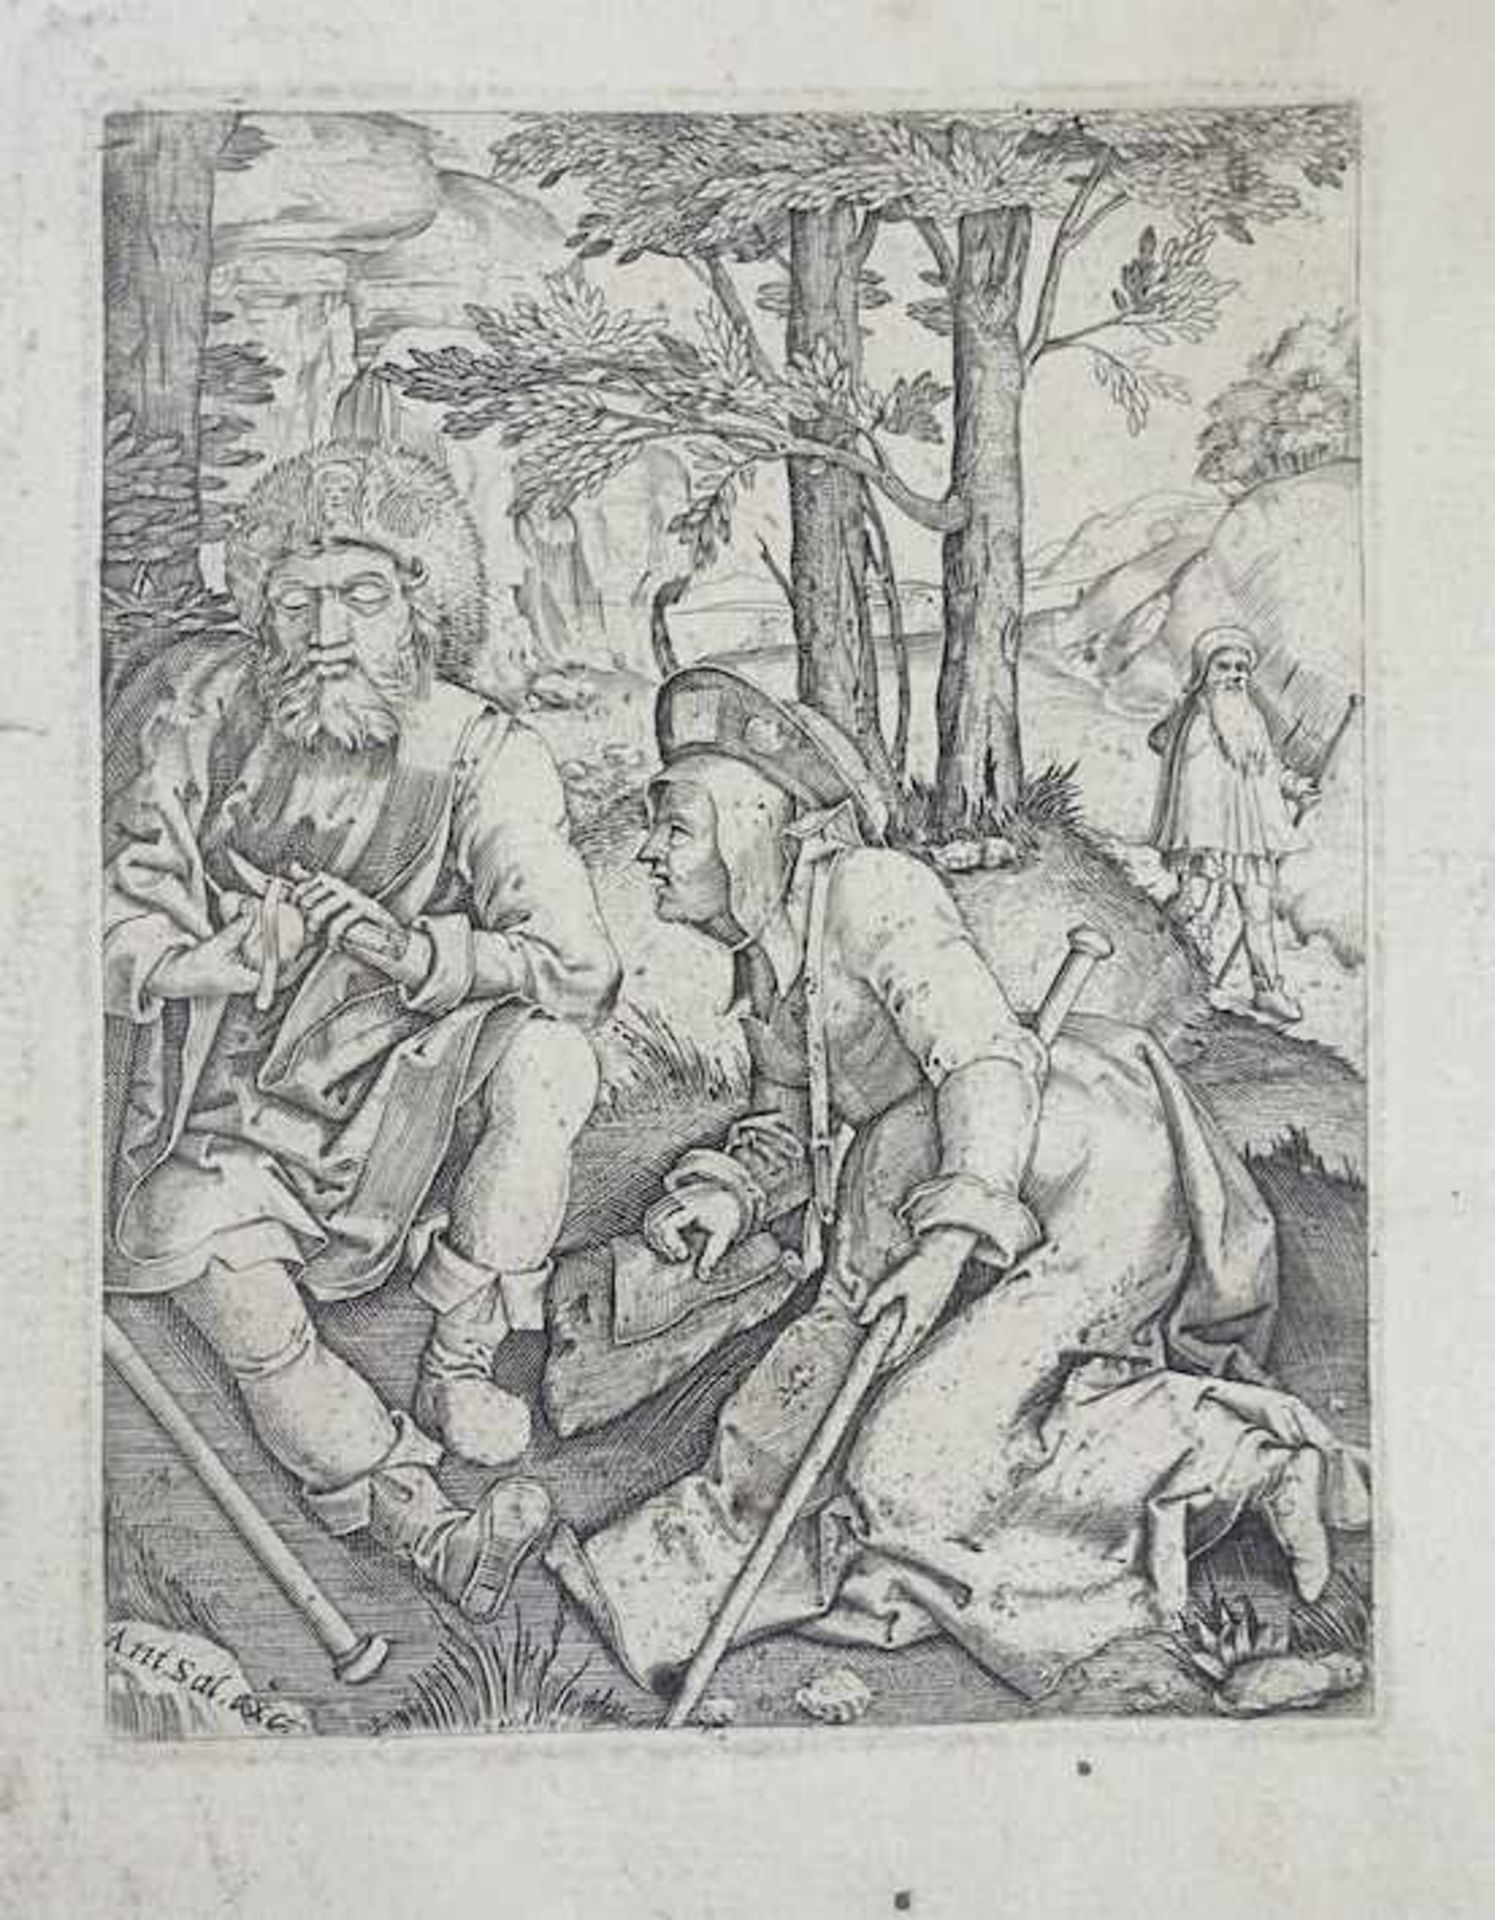 LEYDEN, Lucas v. (1494-1533). (Pilgrims at rest). Ant. Sal. exc. Engraving in reverse without the